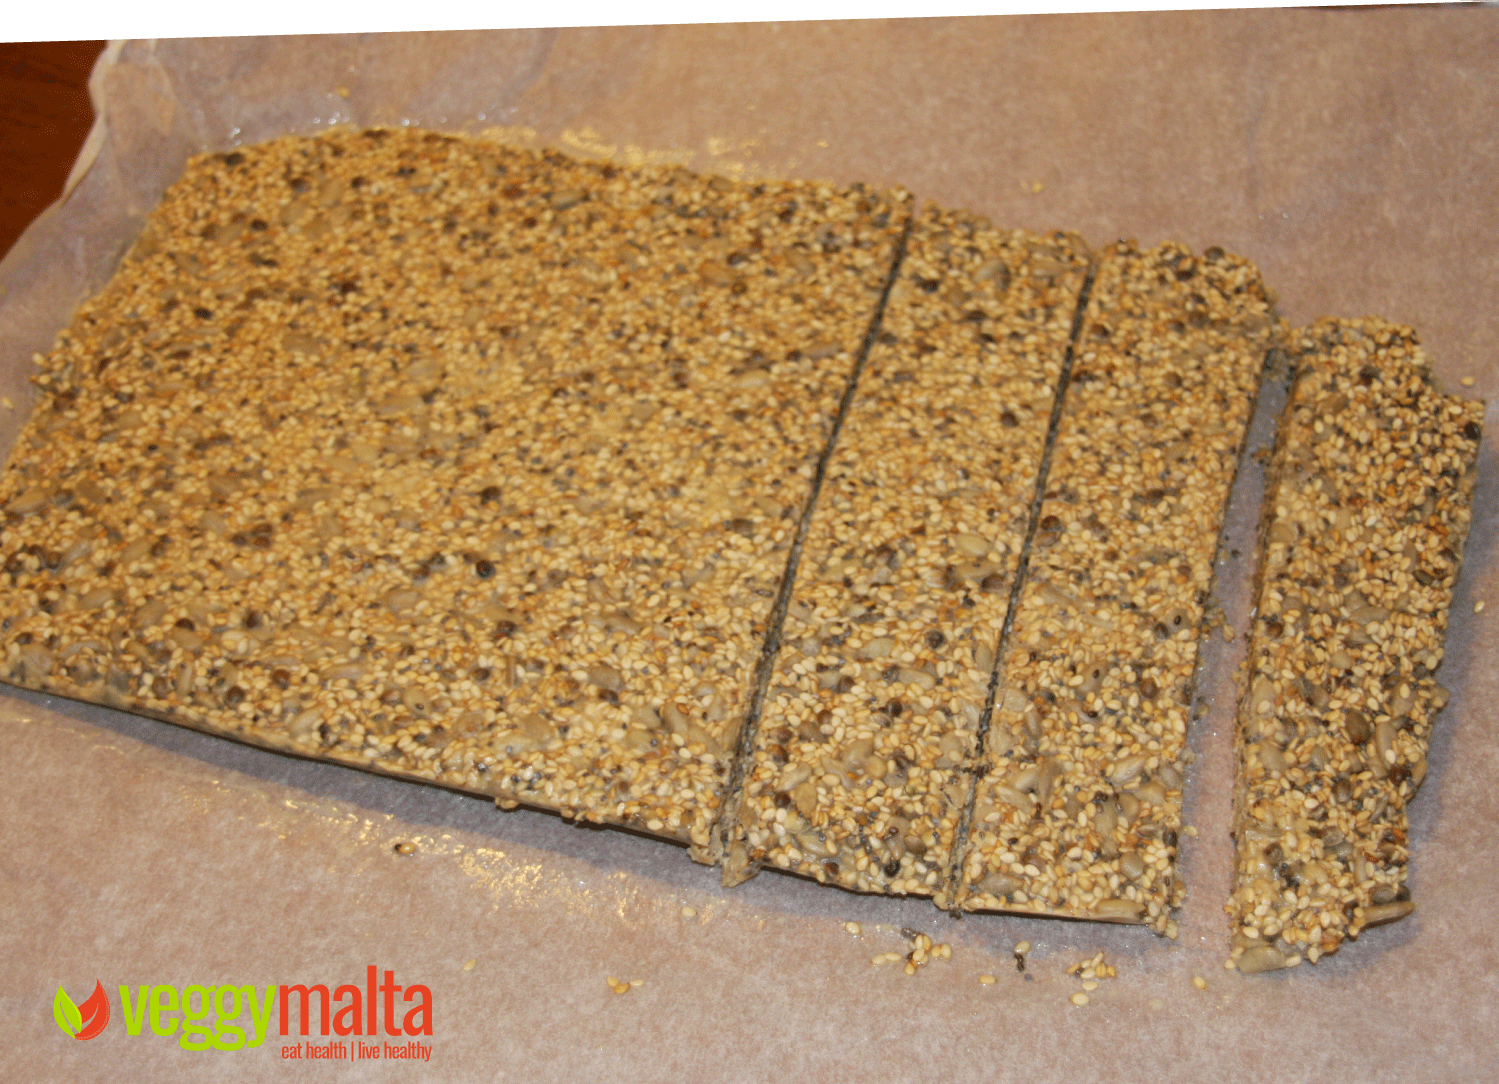 sesame-seeds-and-multi-seeds-protein-bar-not-yet-cut